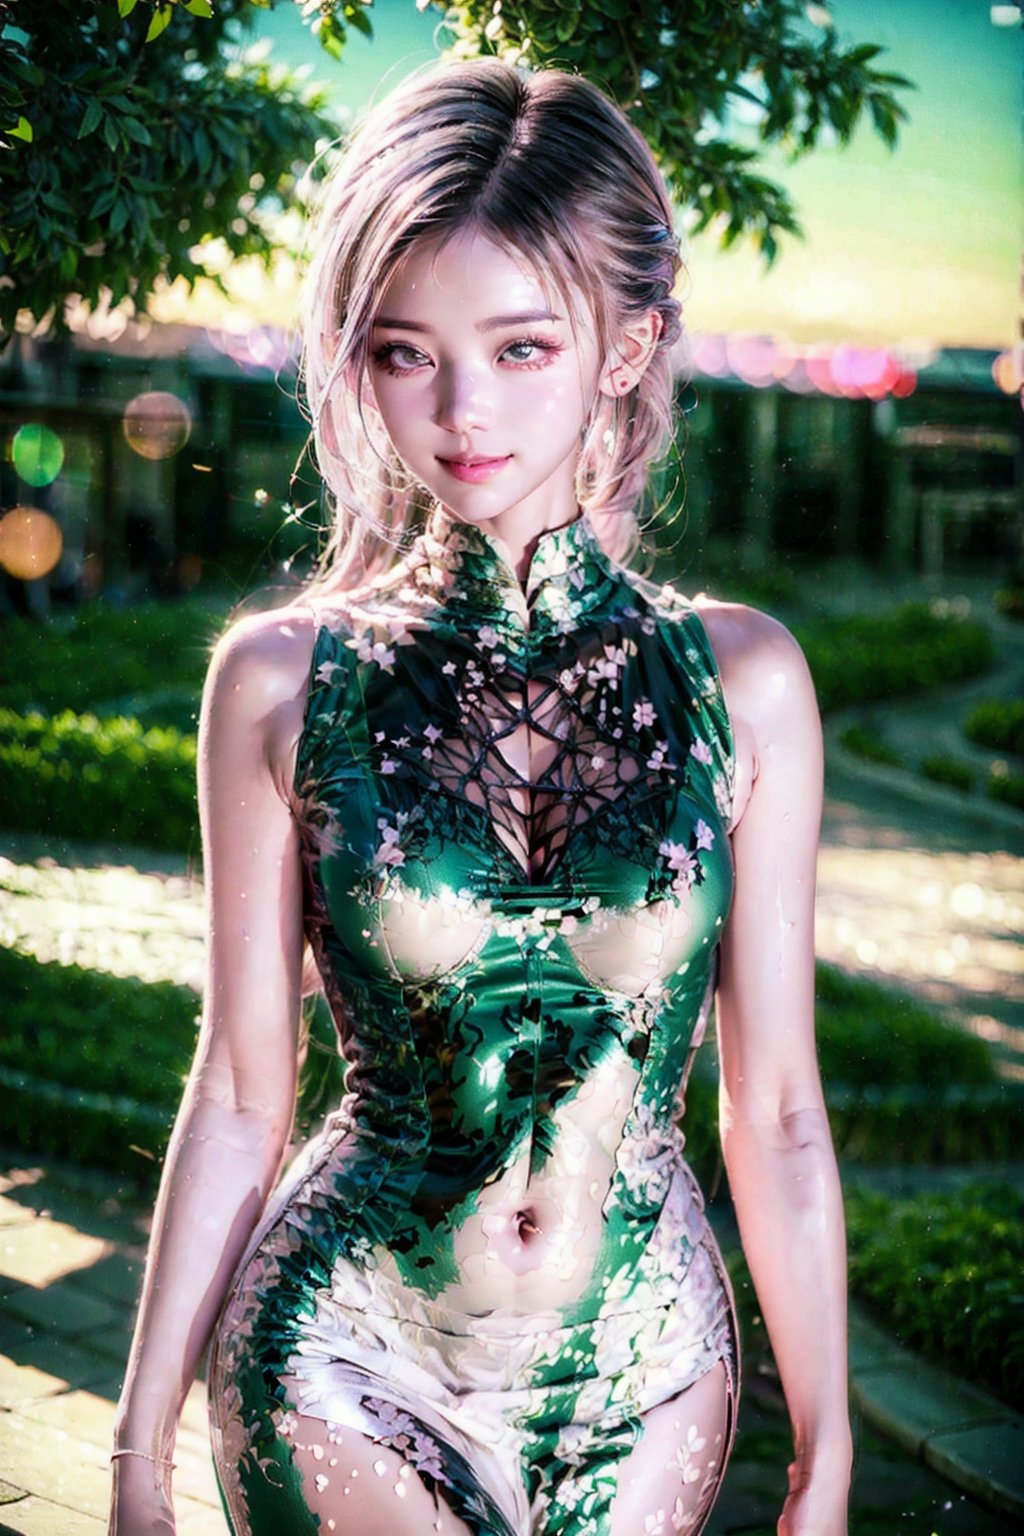 (Fujifilm), Real photo, a Japanese woman, 19 years old girl, Winter style, snow falling, plum flowers blooming, wearing a pink china cheongsam, smiling, the pink cherry blossom petals are flying all over the picture, clear and bright, super High quality, exquisite details, delicate and clear facial features, half body, clear waist,1 girl, Double exposure, Please give her some more background or context so we can add more details ,perfect split lighting,ZGirl,Nature, flowers blooming fantastic and dreamy light romantic lighting bokeh background,snow_scene_background,Hajime Sorayama,metallic effect,beautiful girls